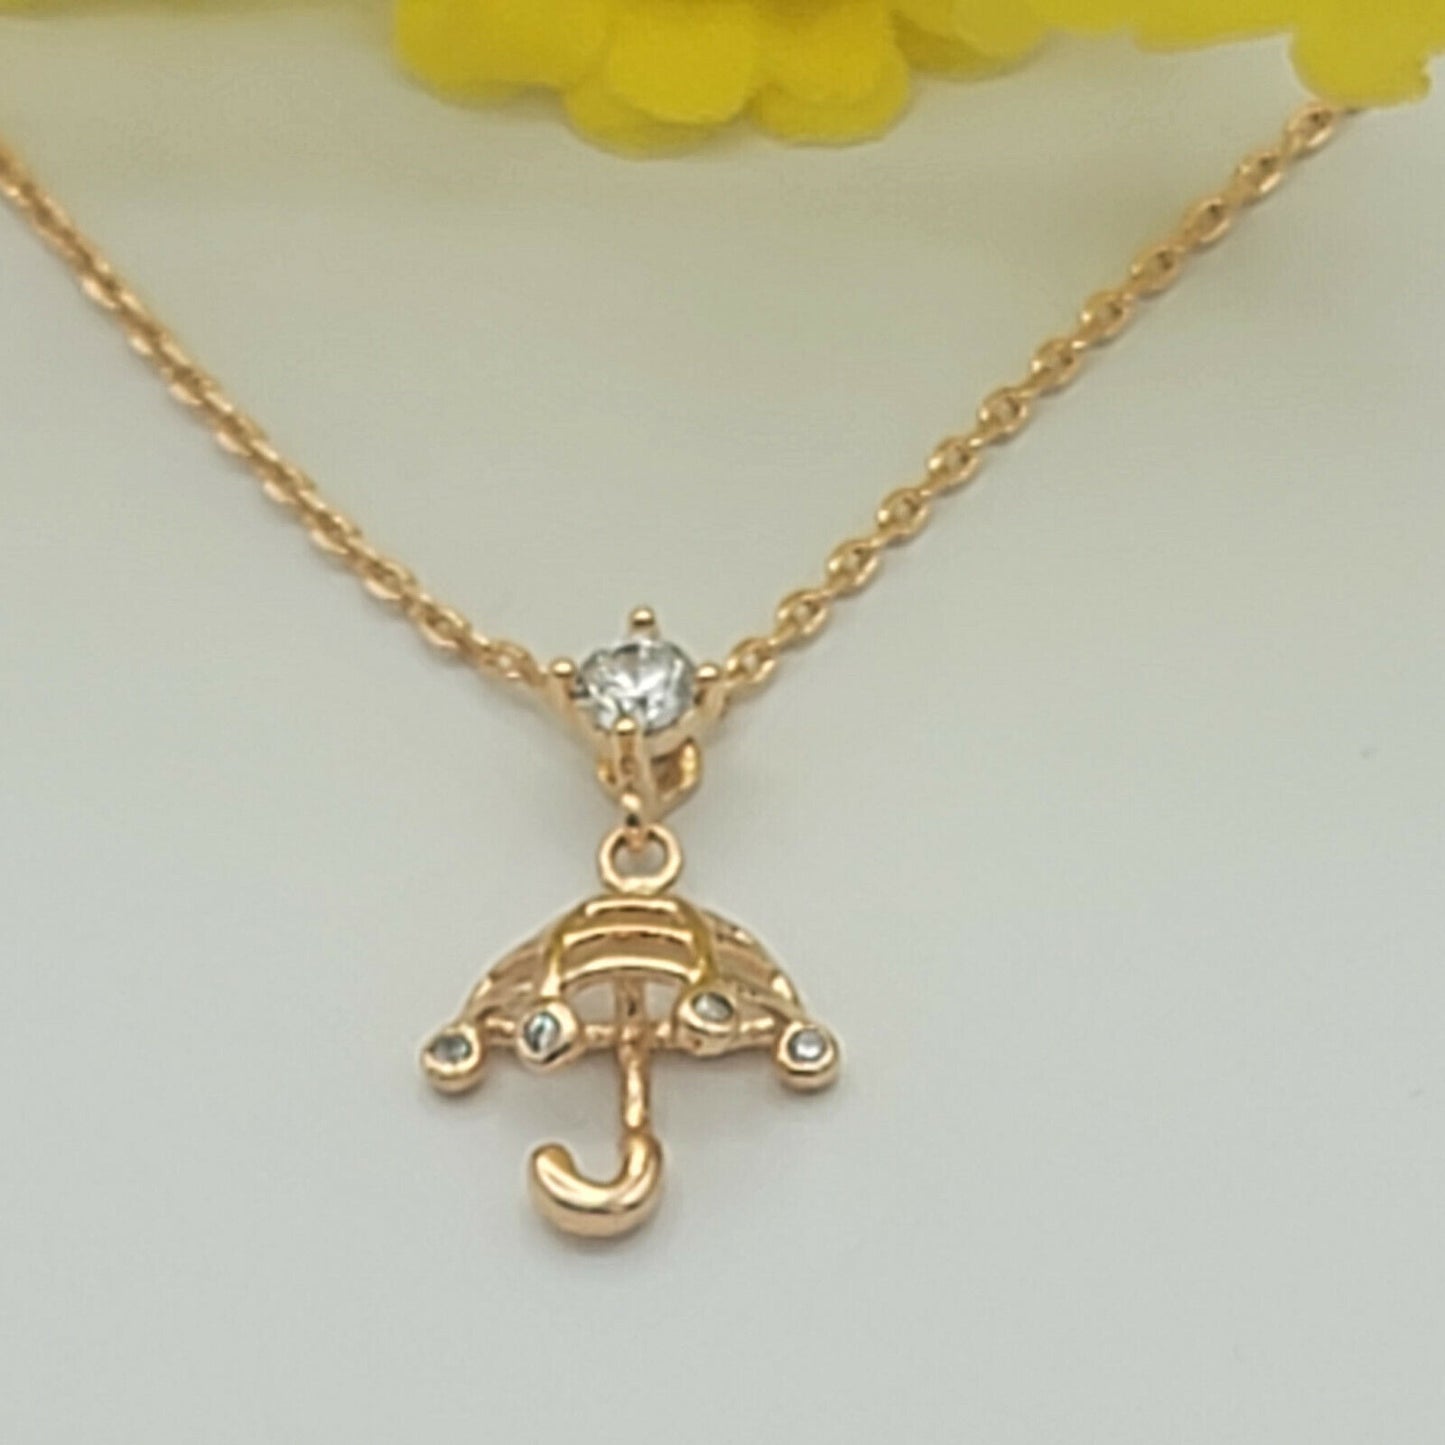 Necklaces - 18K Gold Plated. Mary Poppins Small CZ Umbrella Pendant & Chain.